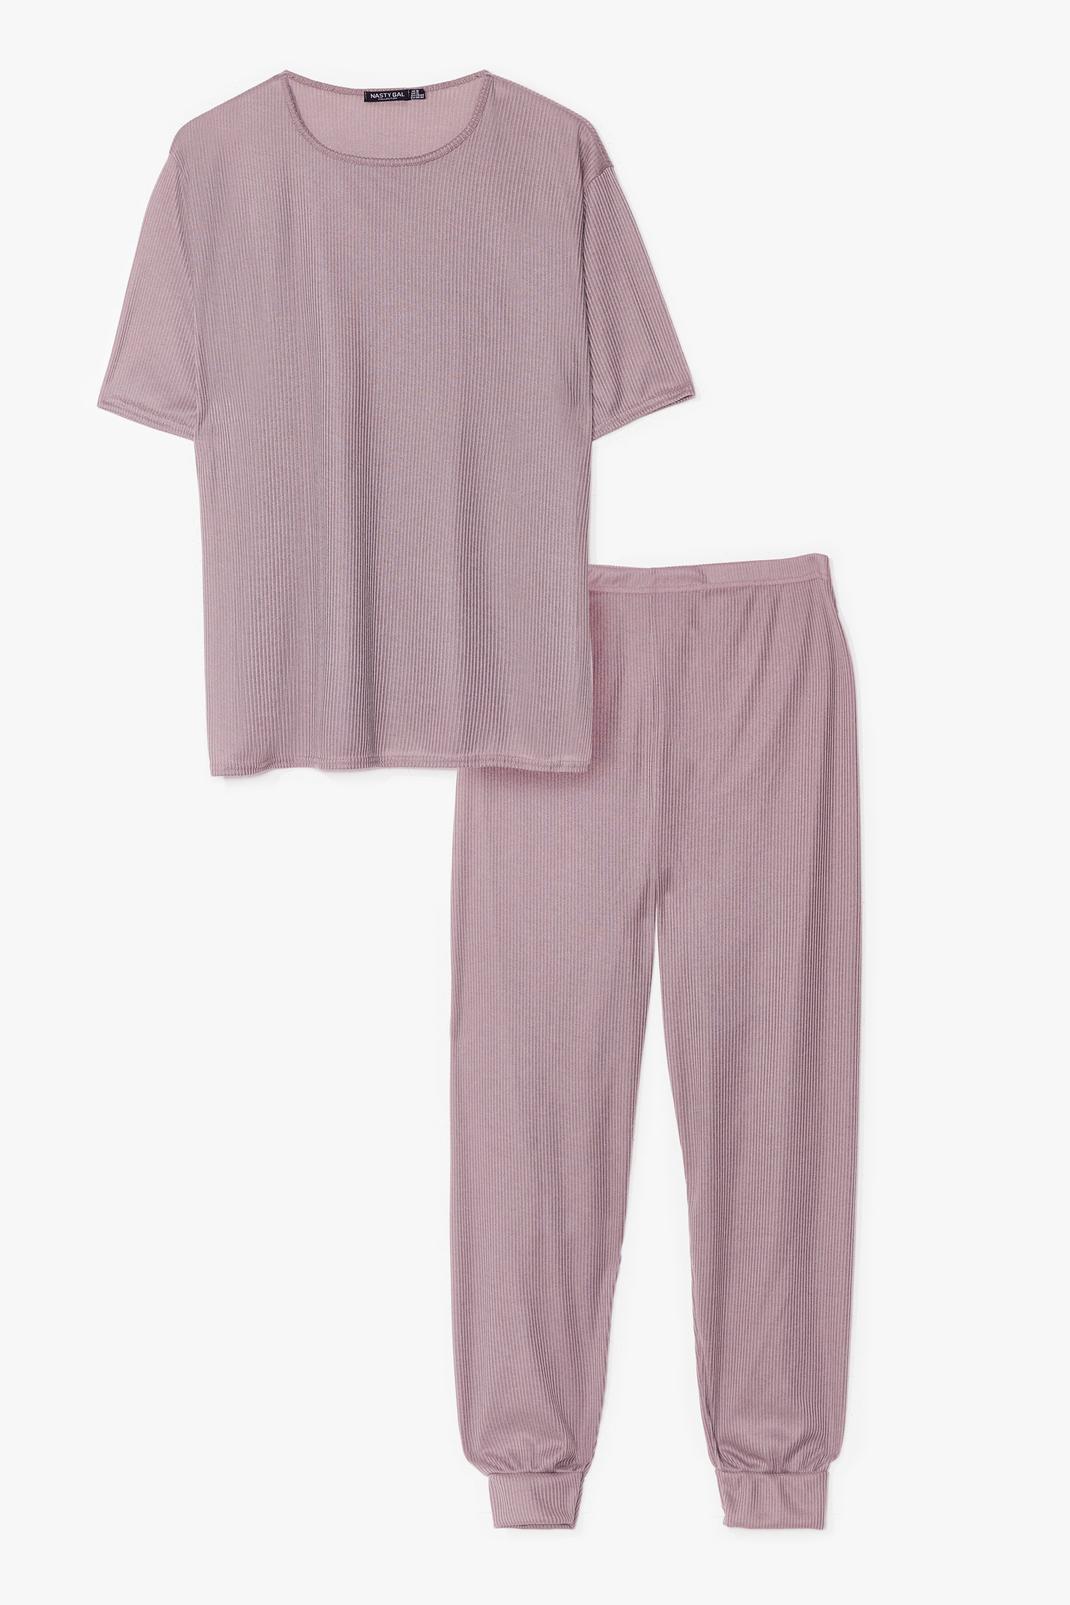 Taupe Plus Size Fitted Sweatpants Loungewear Set image number 1